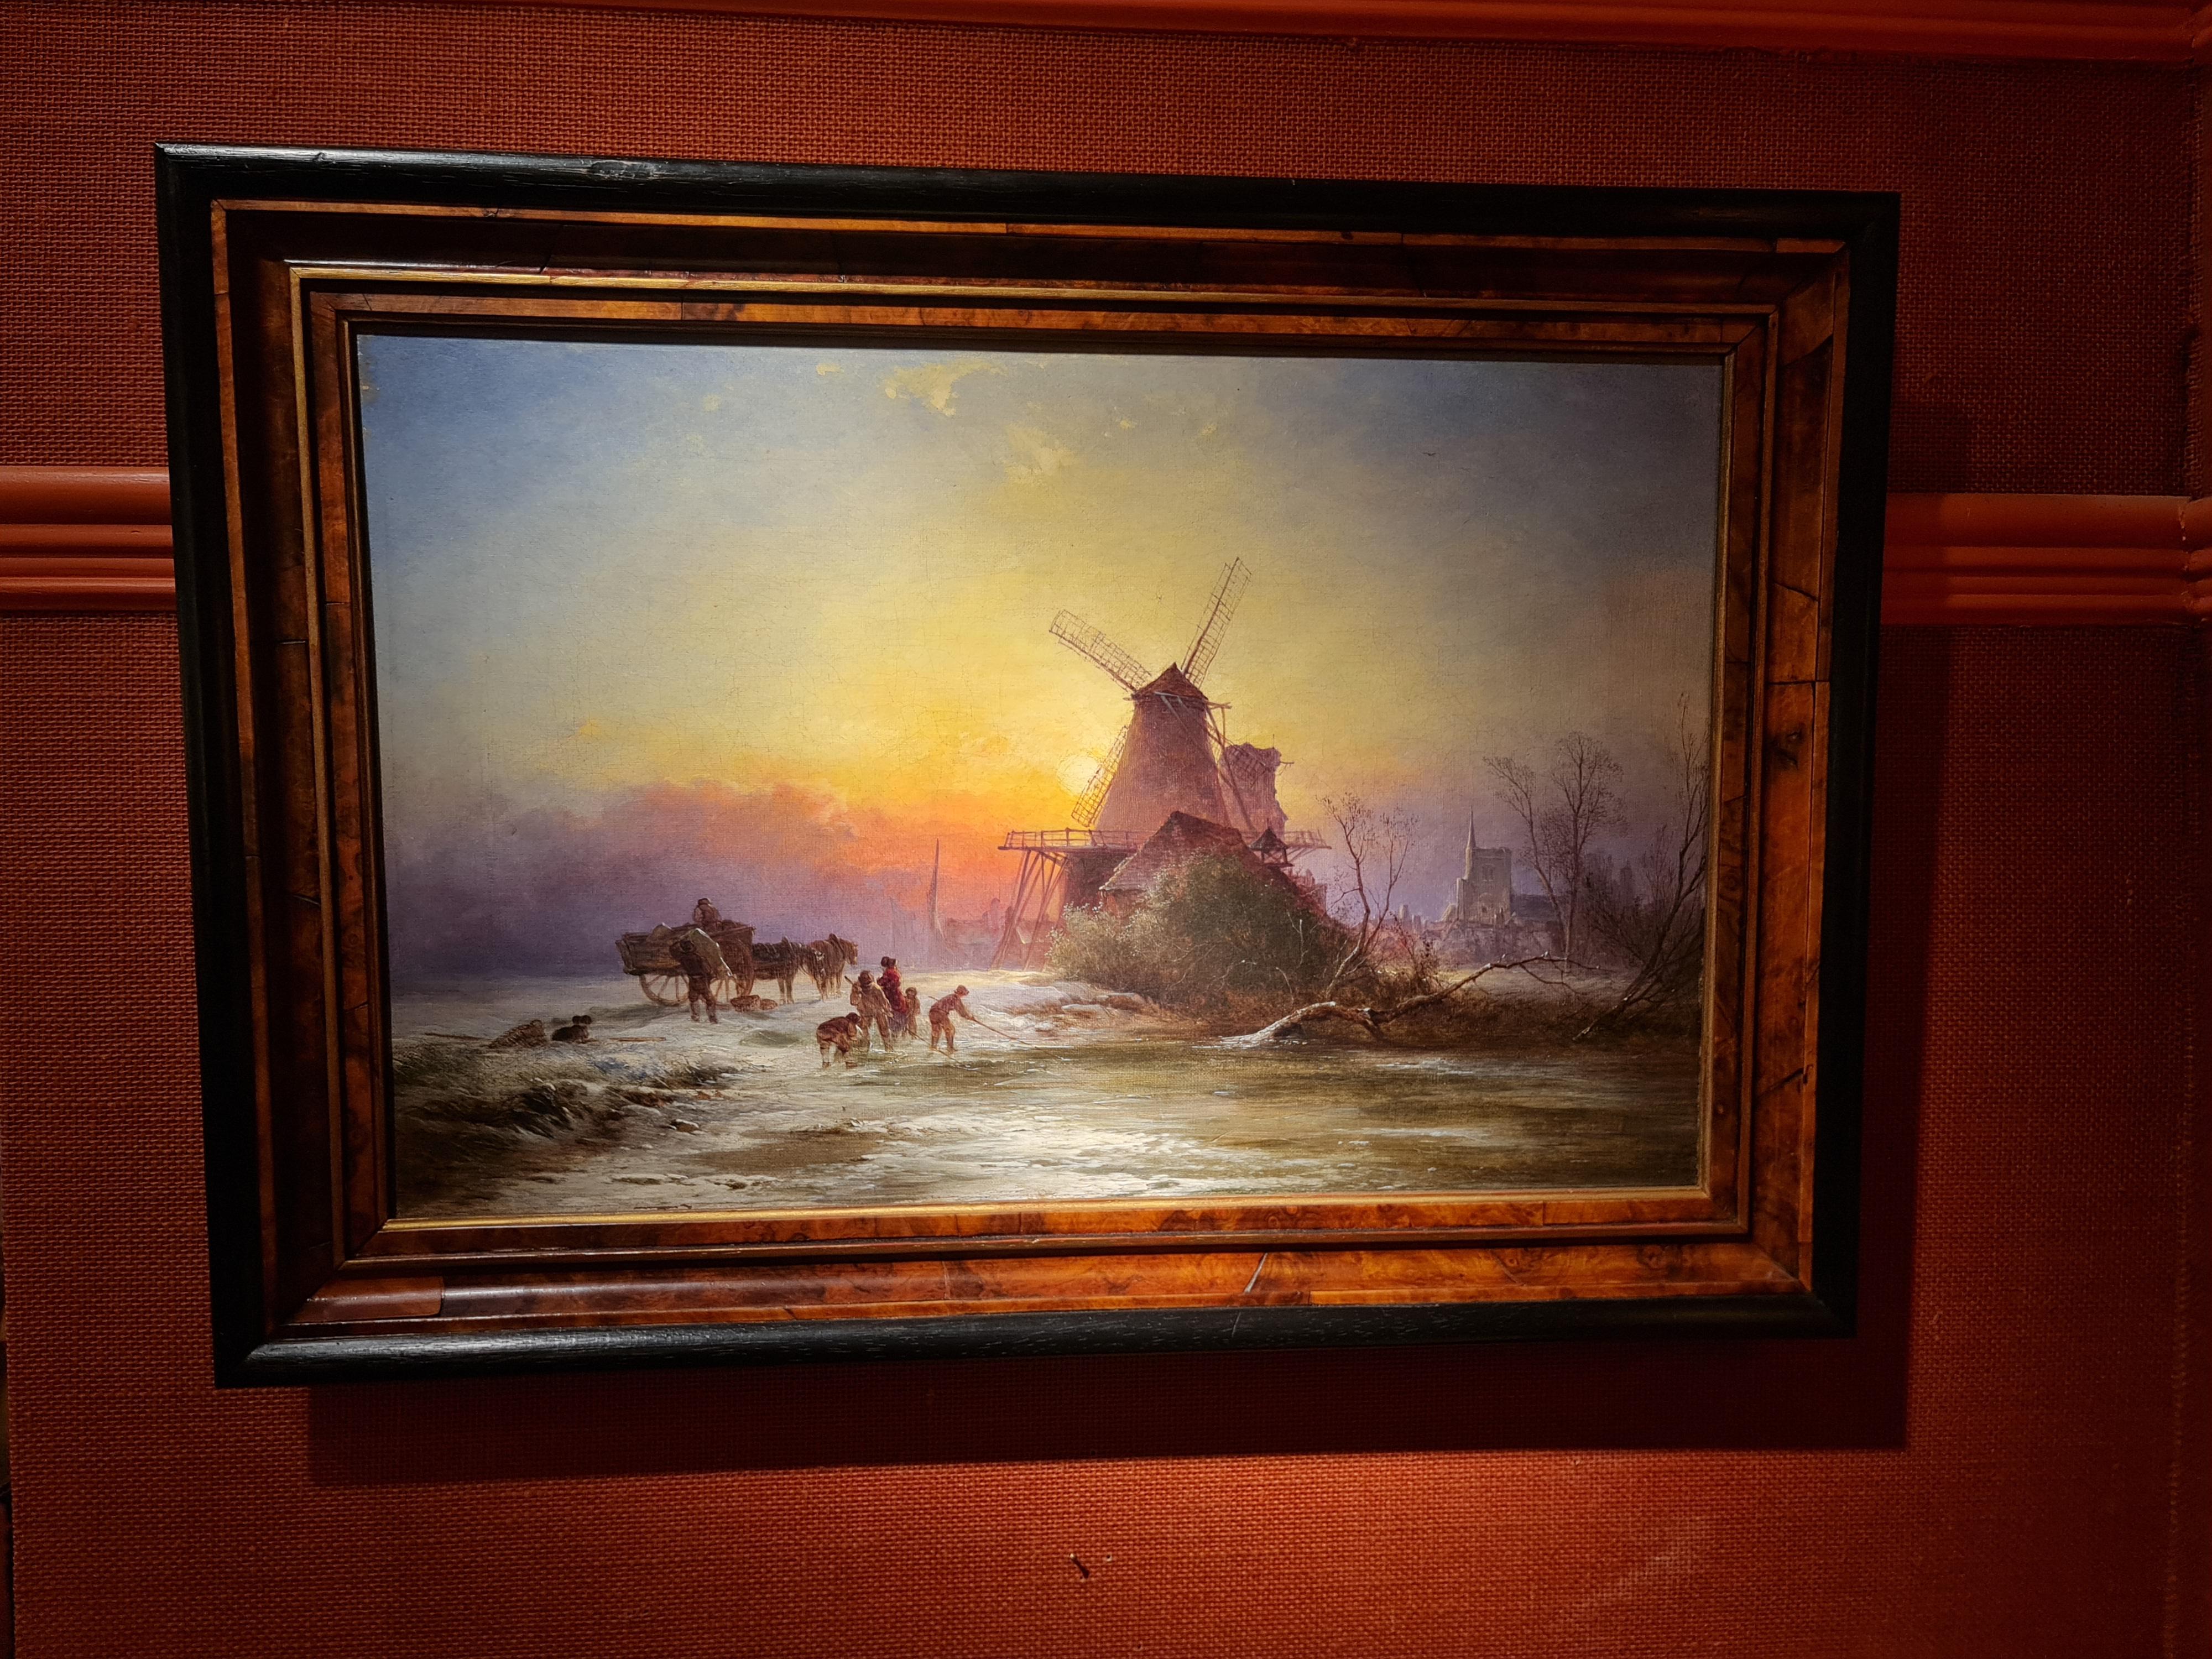 Sunset over a Frozen Landscape
by George Augustus Williams
British 1814 - 1901

Oil on canvas
Canvas size: 13 x 20 inches
Framed size: 17 x 24 inches

Monogrammed lower left